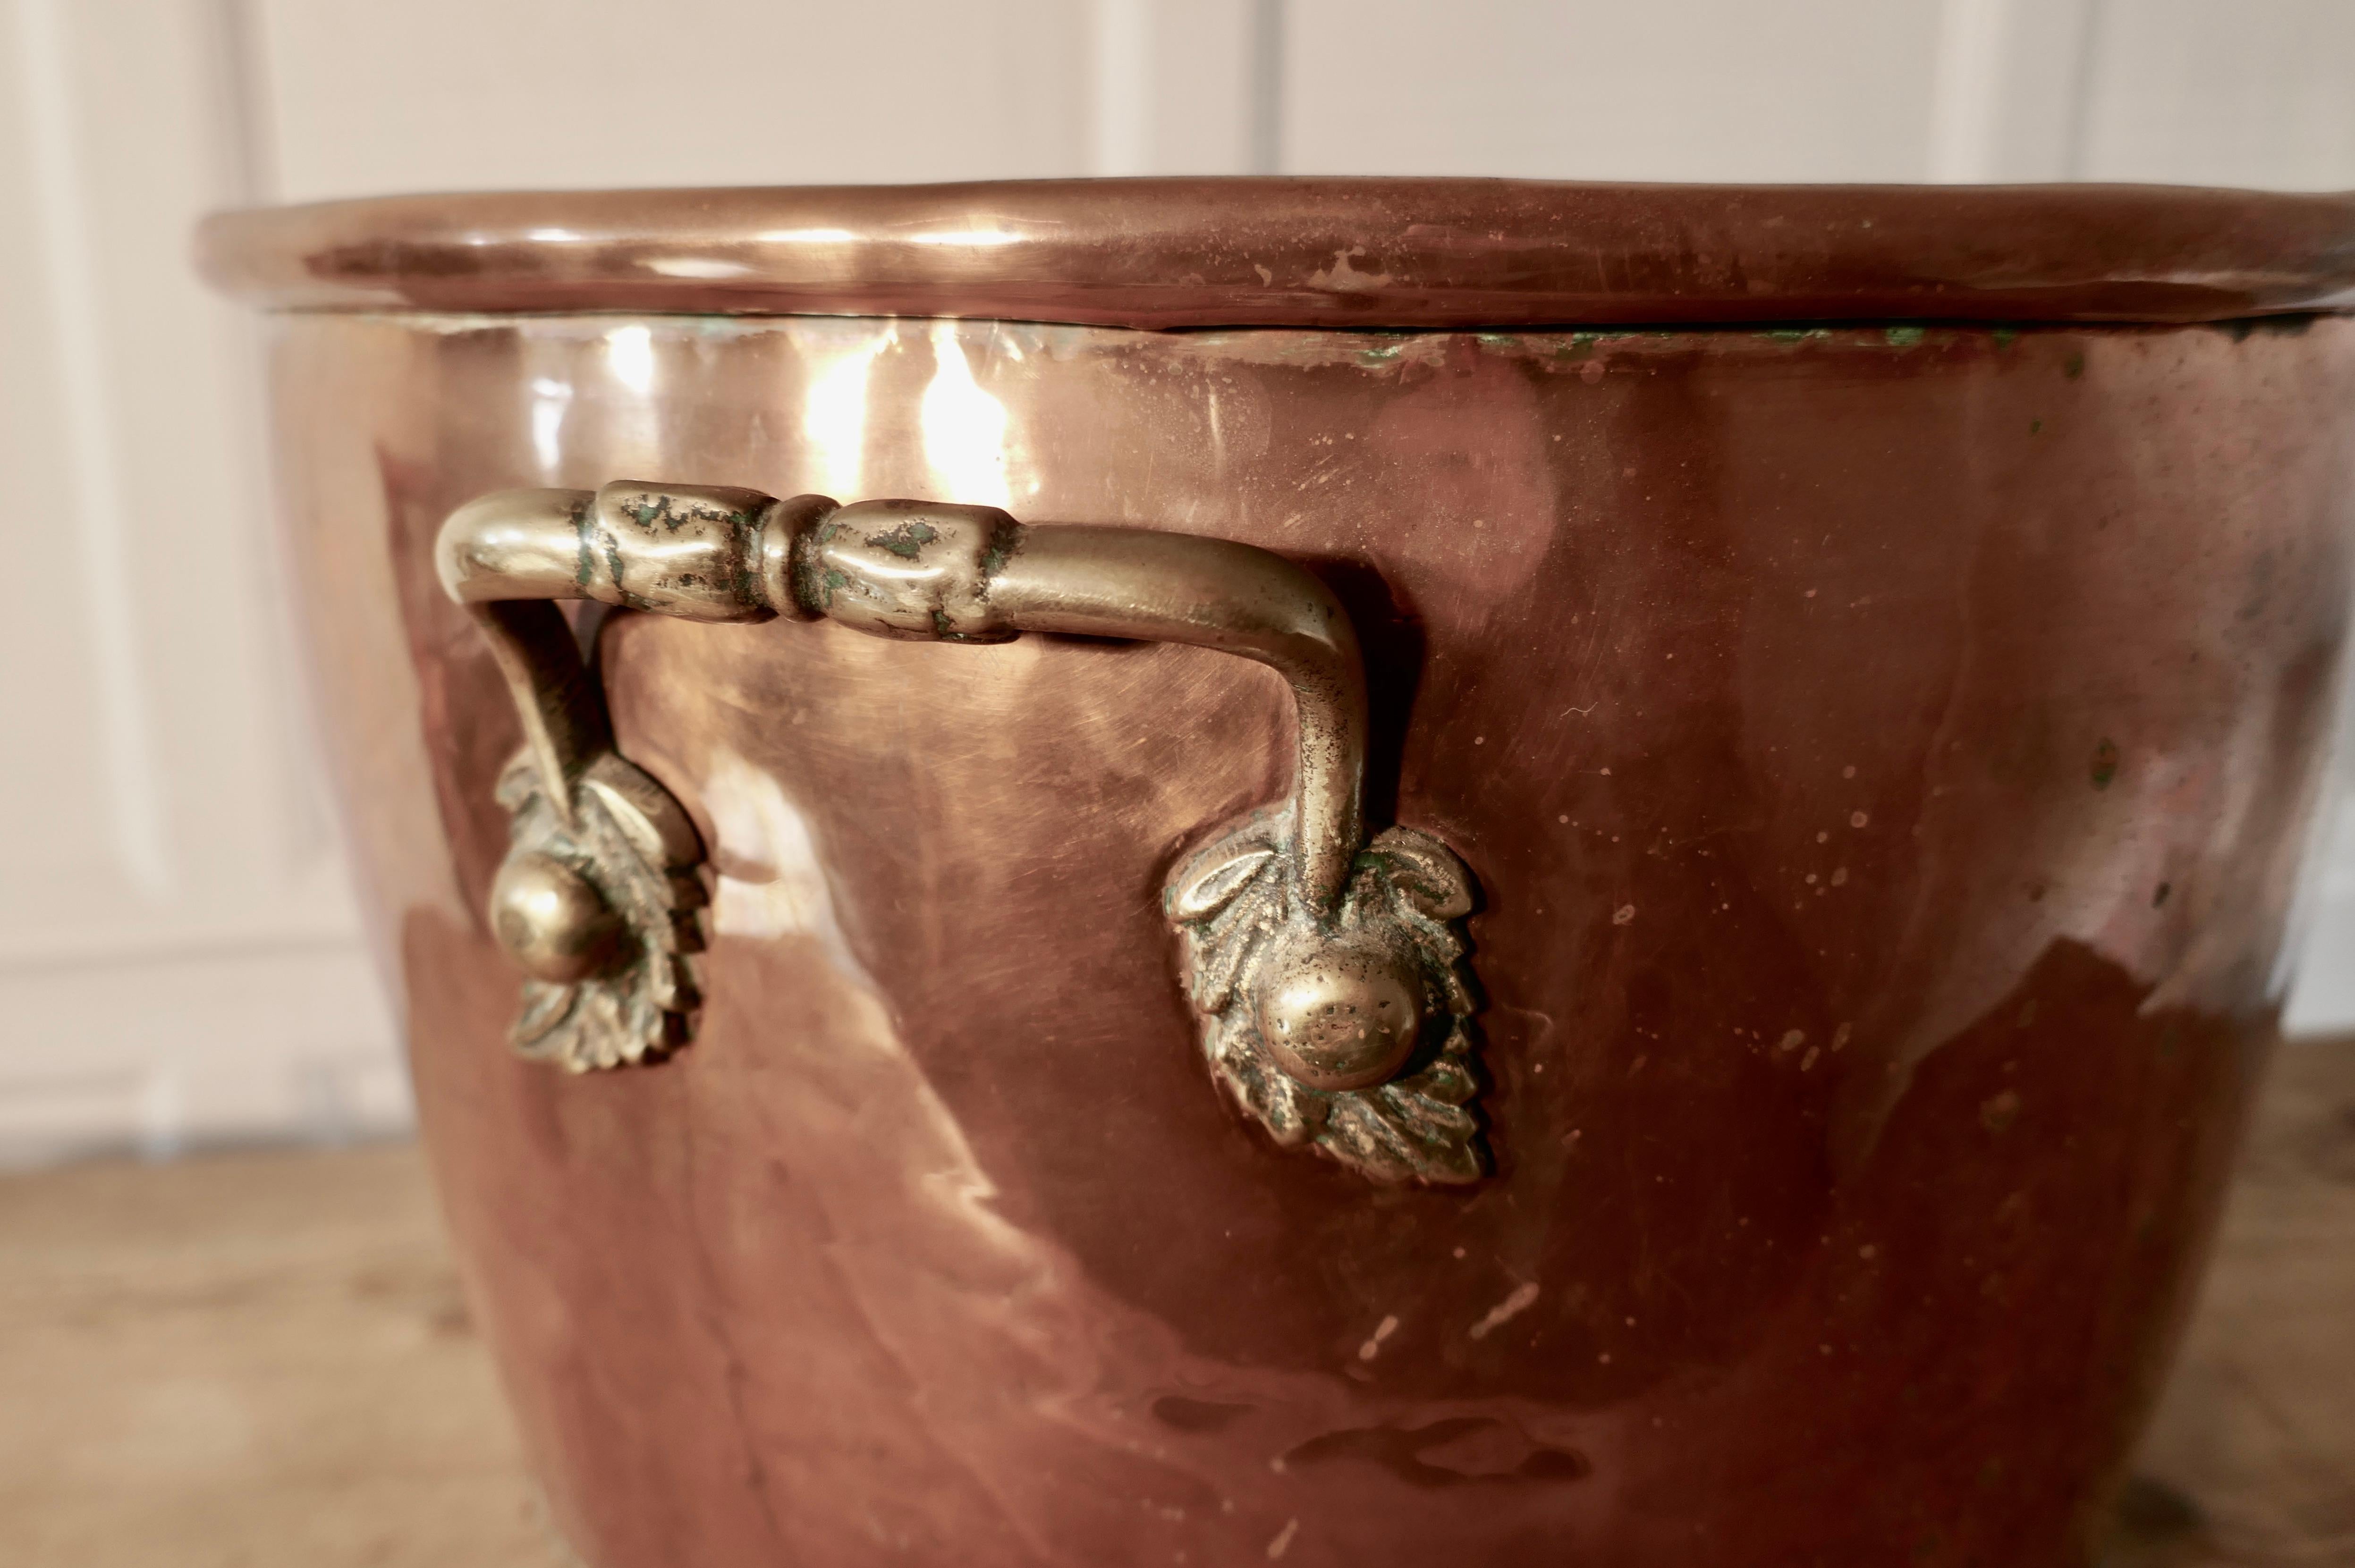 19th century copper log bin cauldron

This is a superior quality copper, it has a heavily riveted construction, it has riveted handles, also three chunky lions paw feet.

The copper cauldron would work well as a log basket or as planter for a